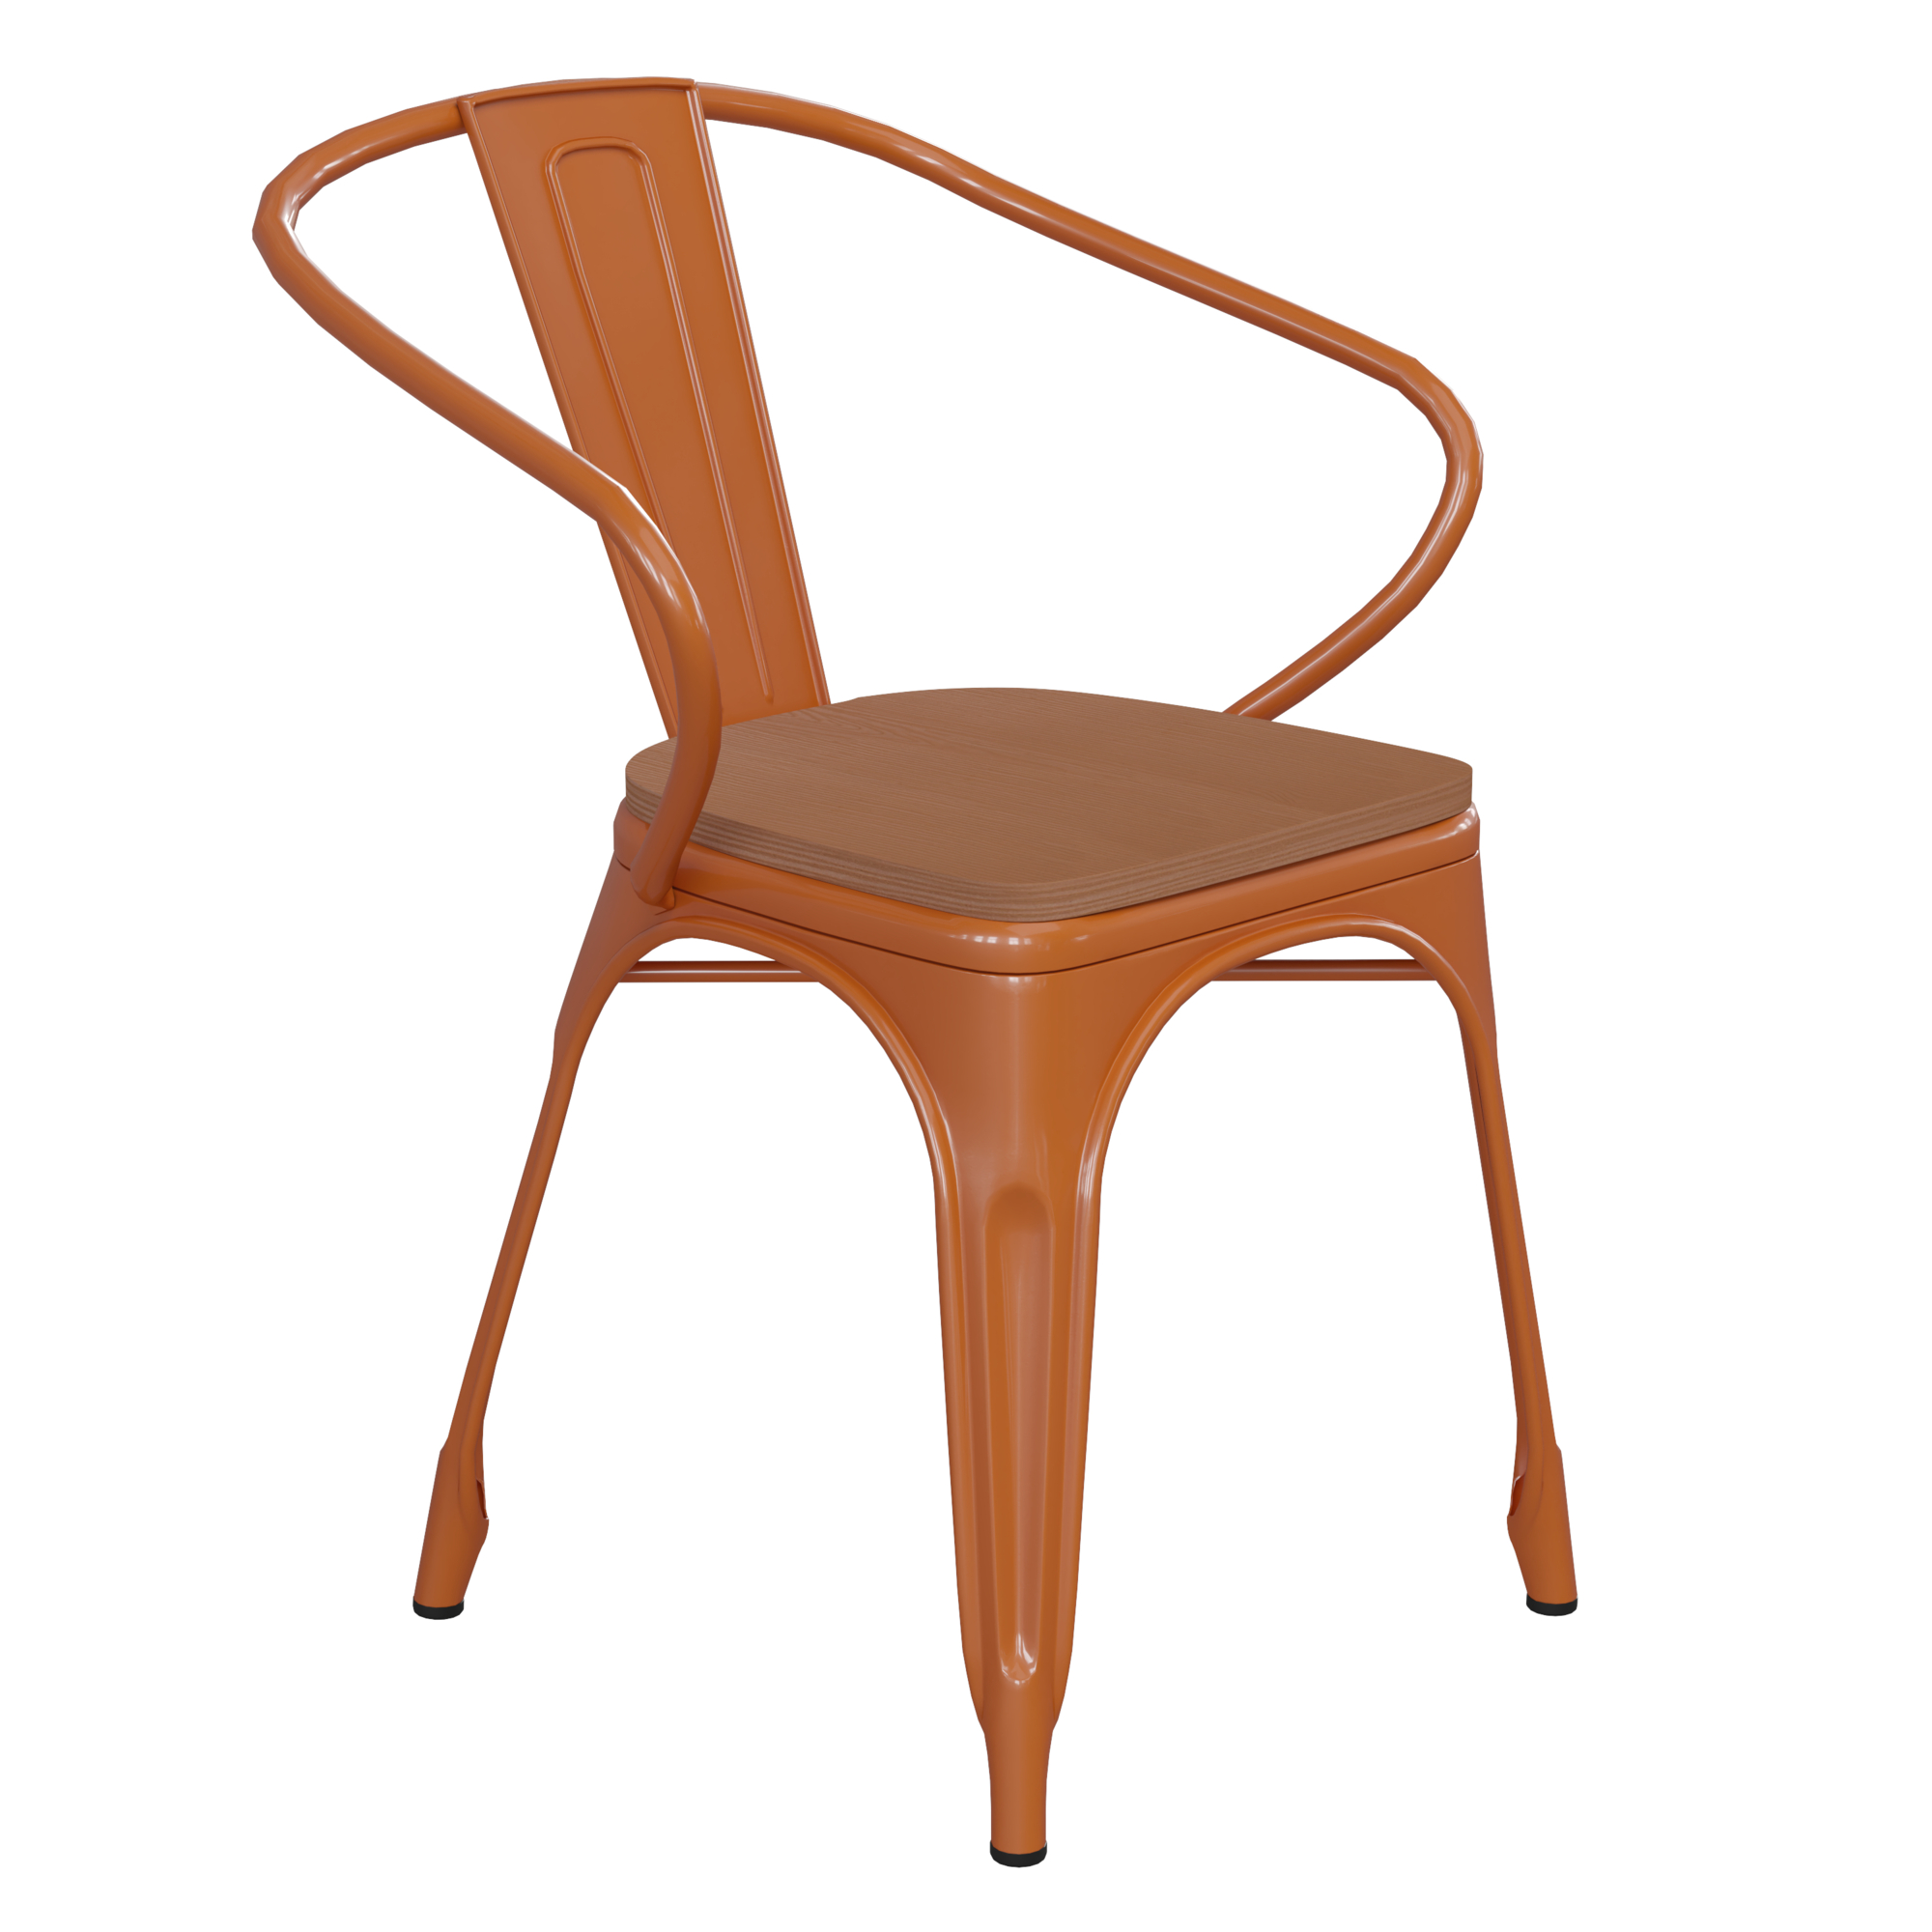 Flash Furniture, Orange Metal Stack Chair with Teak Poly Resin Seat, Primary Color Orange, Included (qty.) 1, Model CH31270ORPL1T